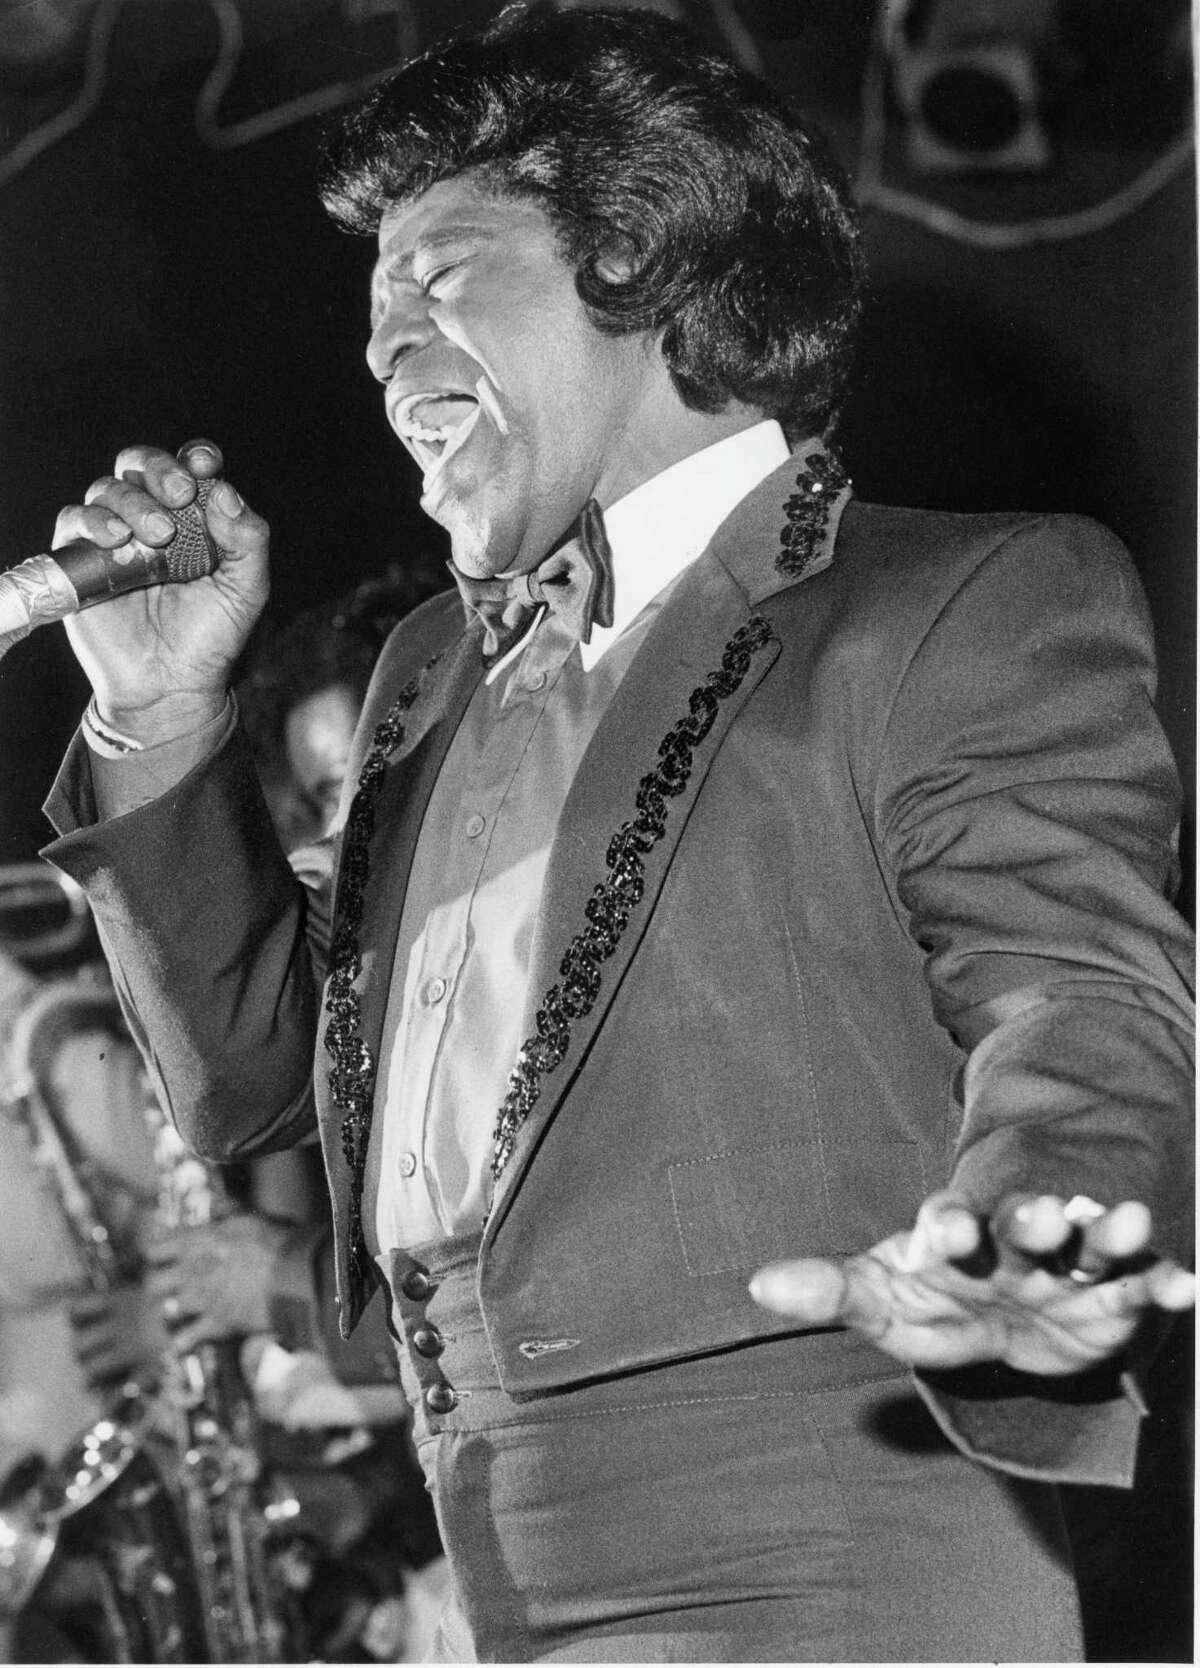 PHOTOS: Fitzgerald's through the yearsJames Brown finds an emotional note during his engagement at Fitzgerald's in 1985. >>See what other big names have played the Houston venue.